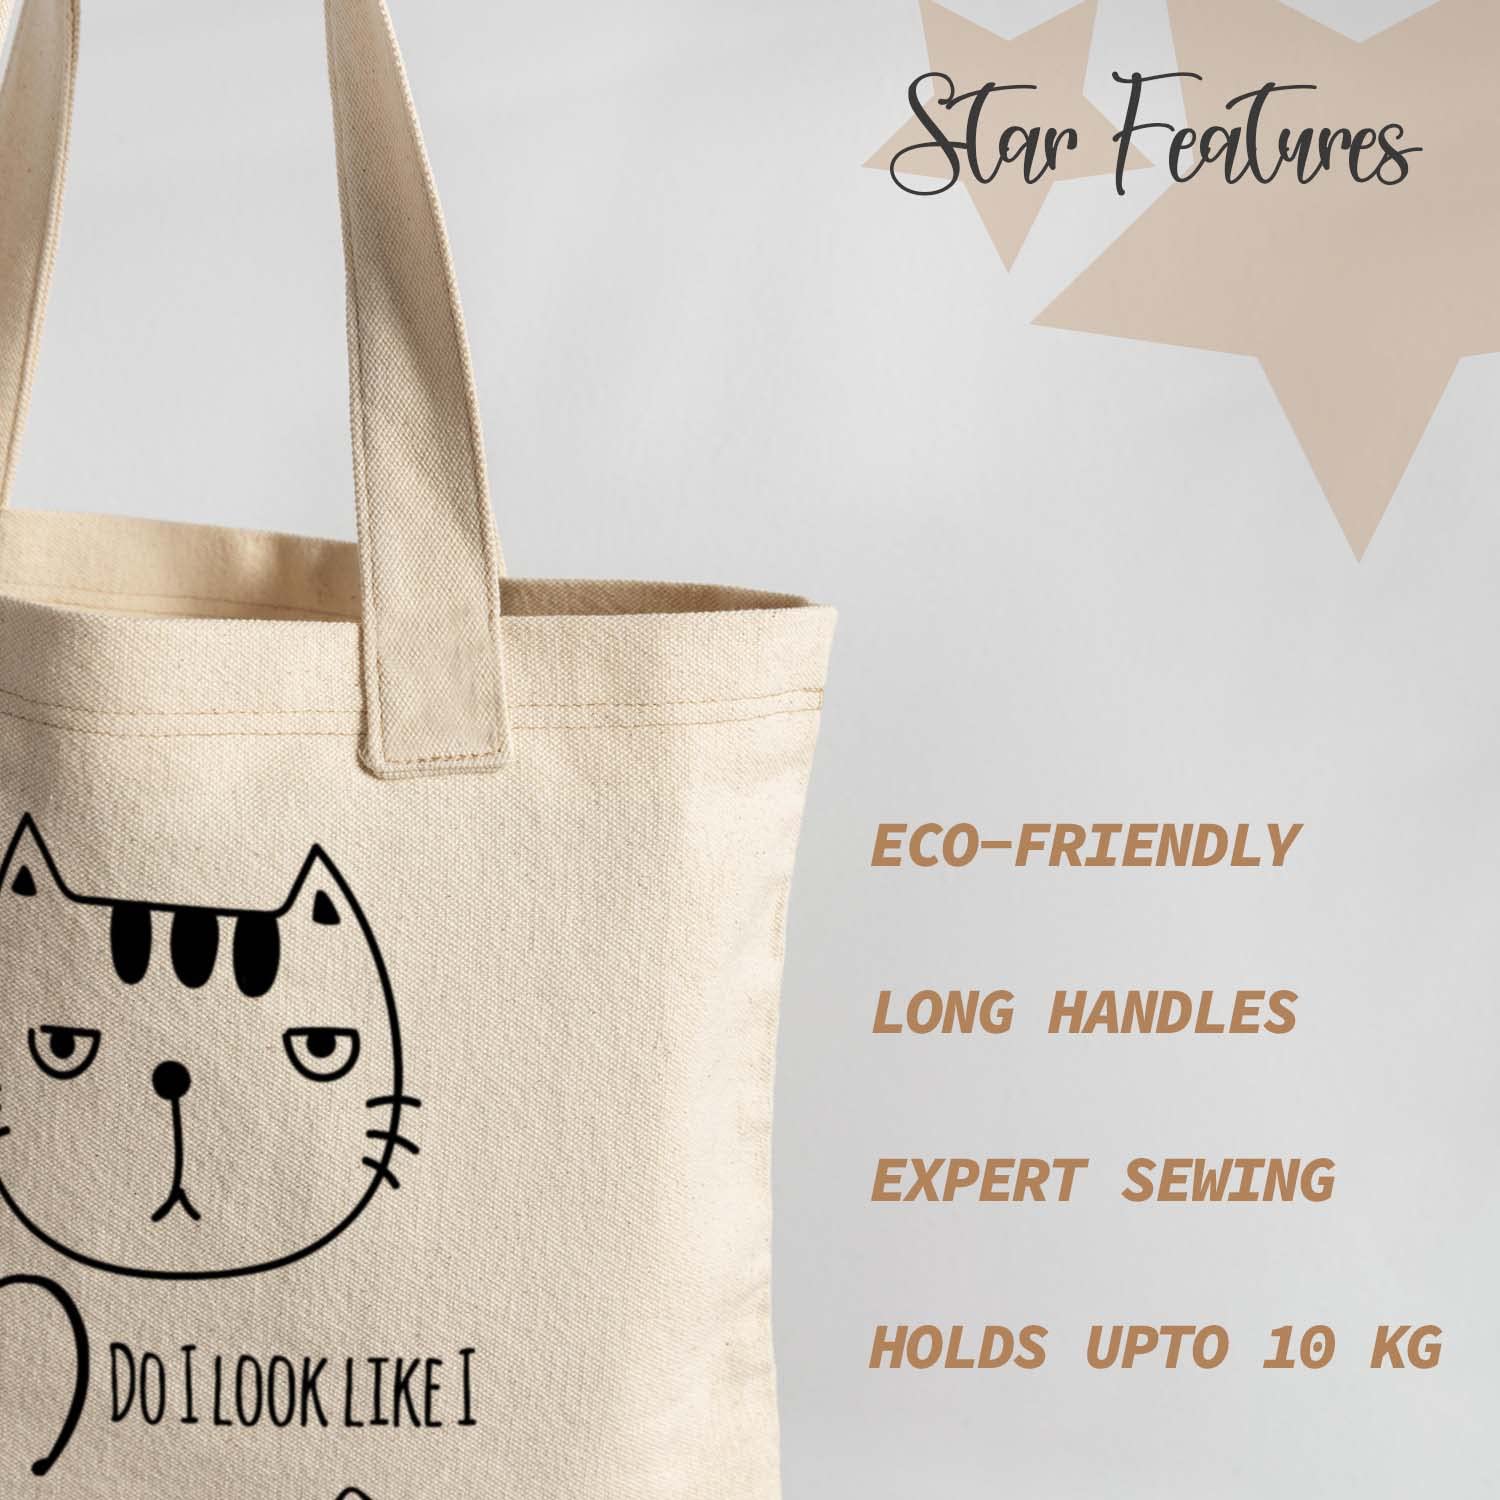 Taiaojing Girls Cotton Canvas Tote Bag with Diamonds 5D DIY Diamond Painting Reusable Grocery Bags for Durable Fashionable Bags, Adult Unisex, Size